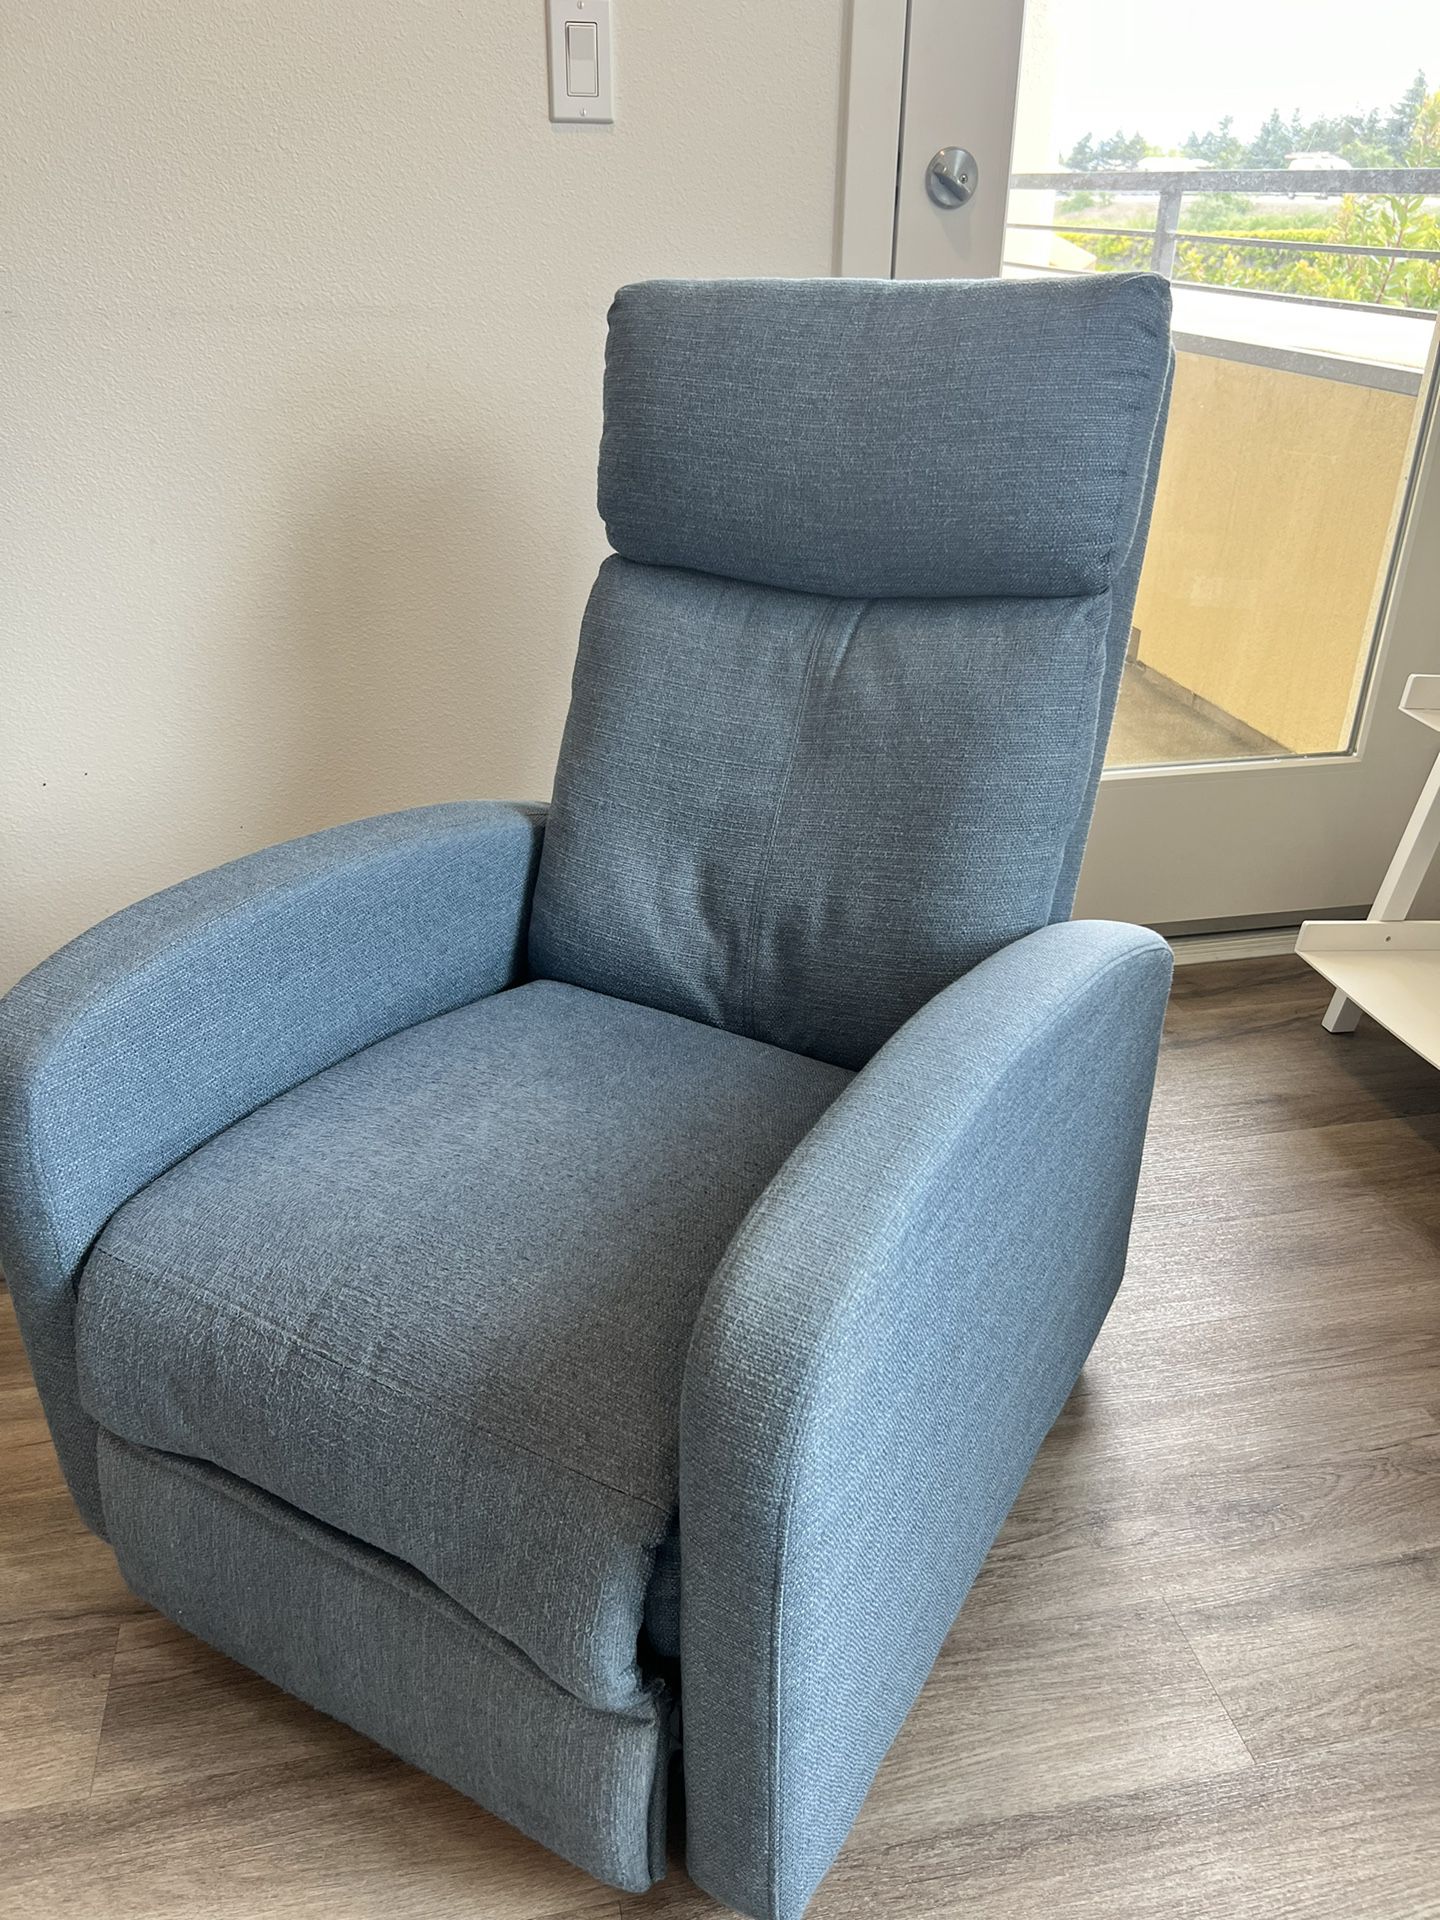 Fabric Recliner Chair (with Electric Massage Option)